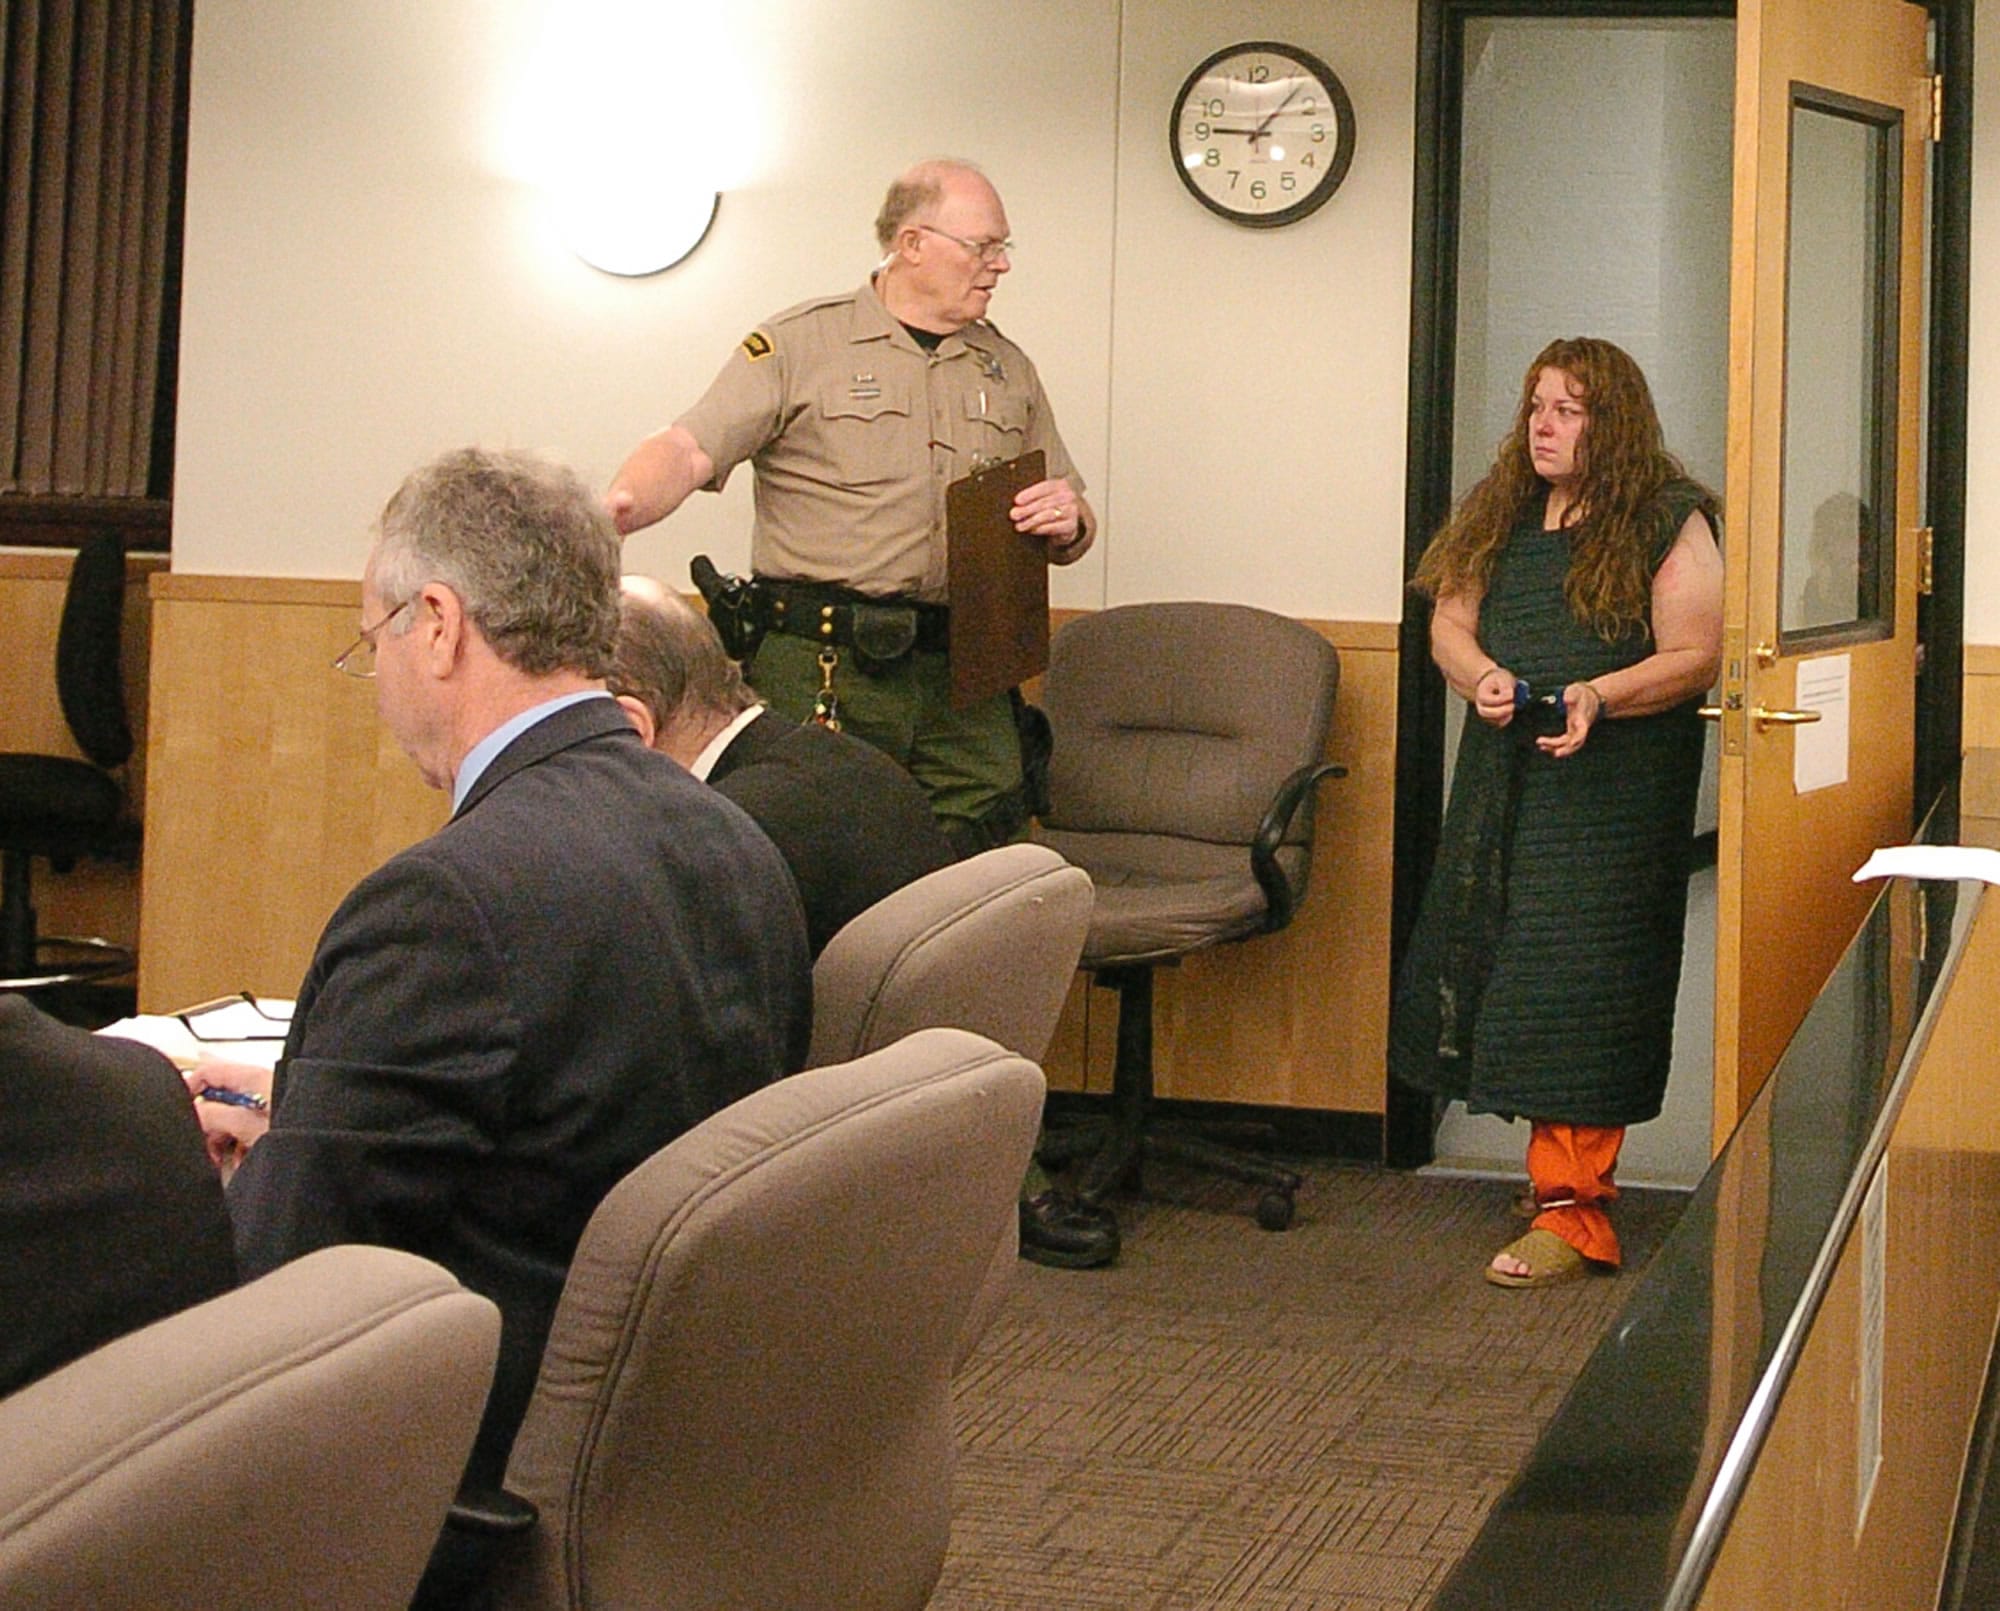 Lori Lyn Goulet, 39, enters Clark County Superior Court on Nov. 28 to appear on suspicion of solicitation to commit murder.